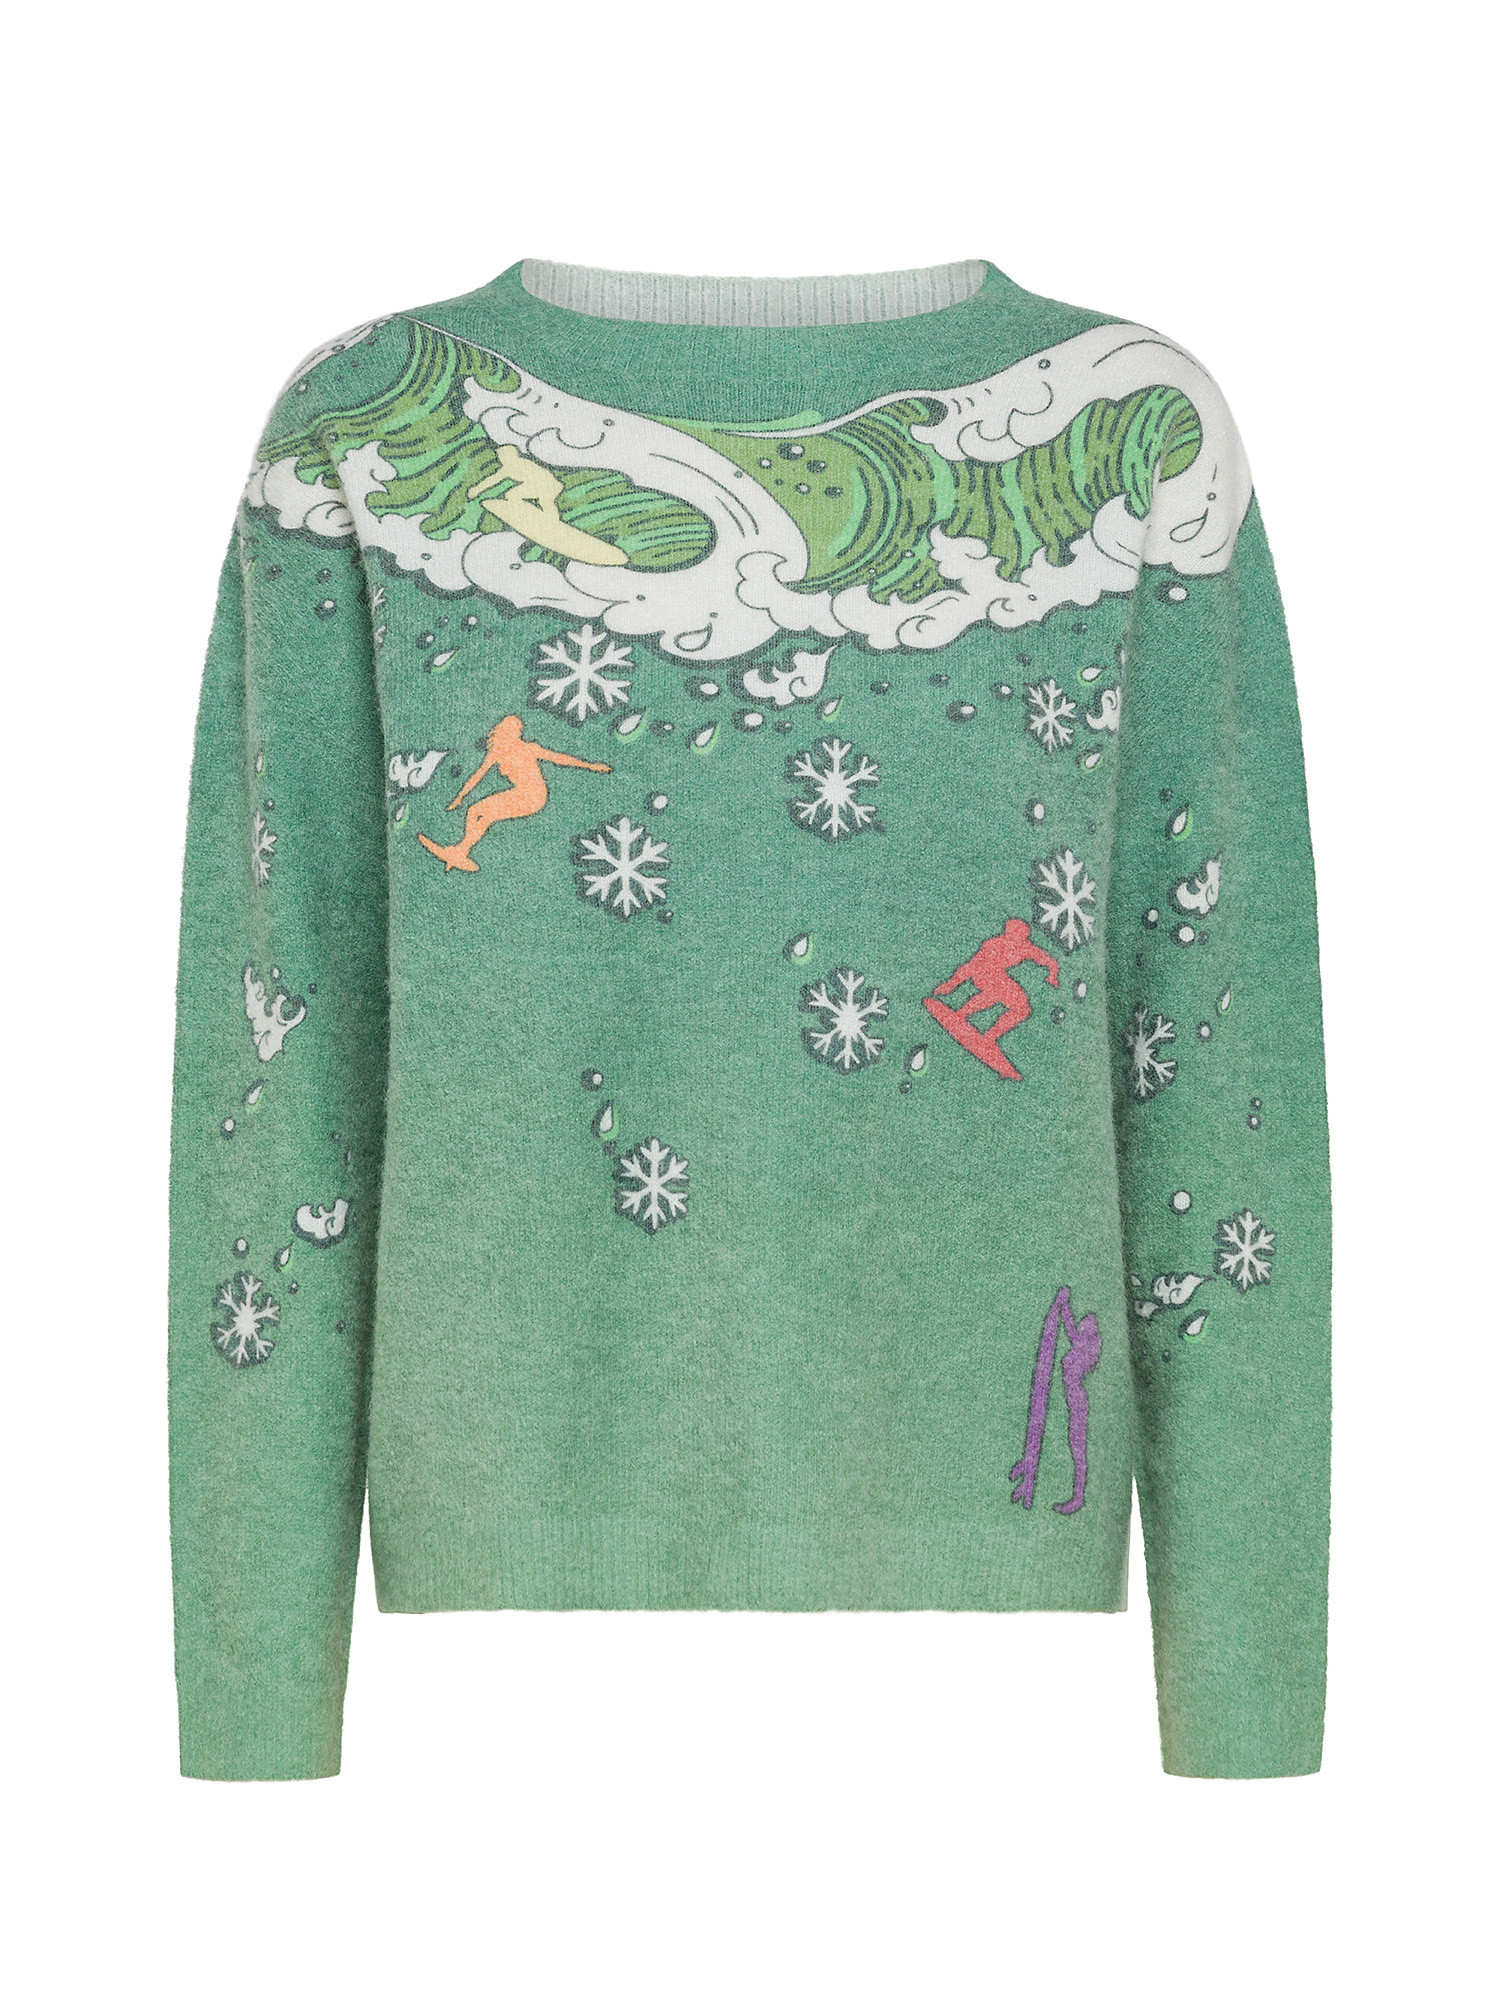 The Surfer's Christmas sweater by Paula Cademartori, , large image number 0